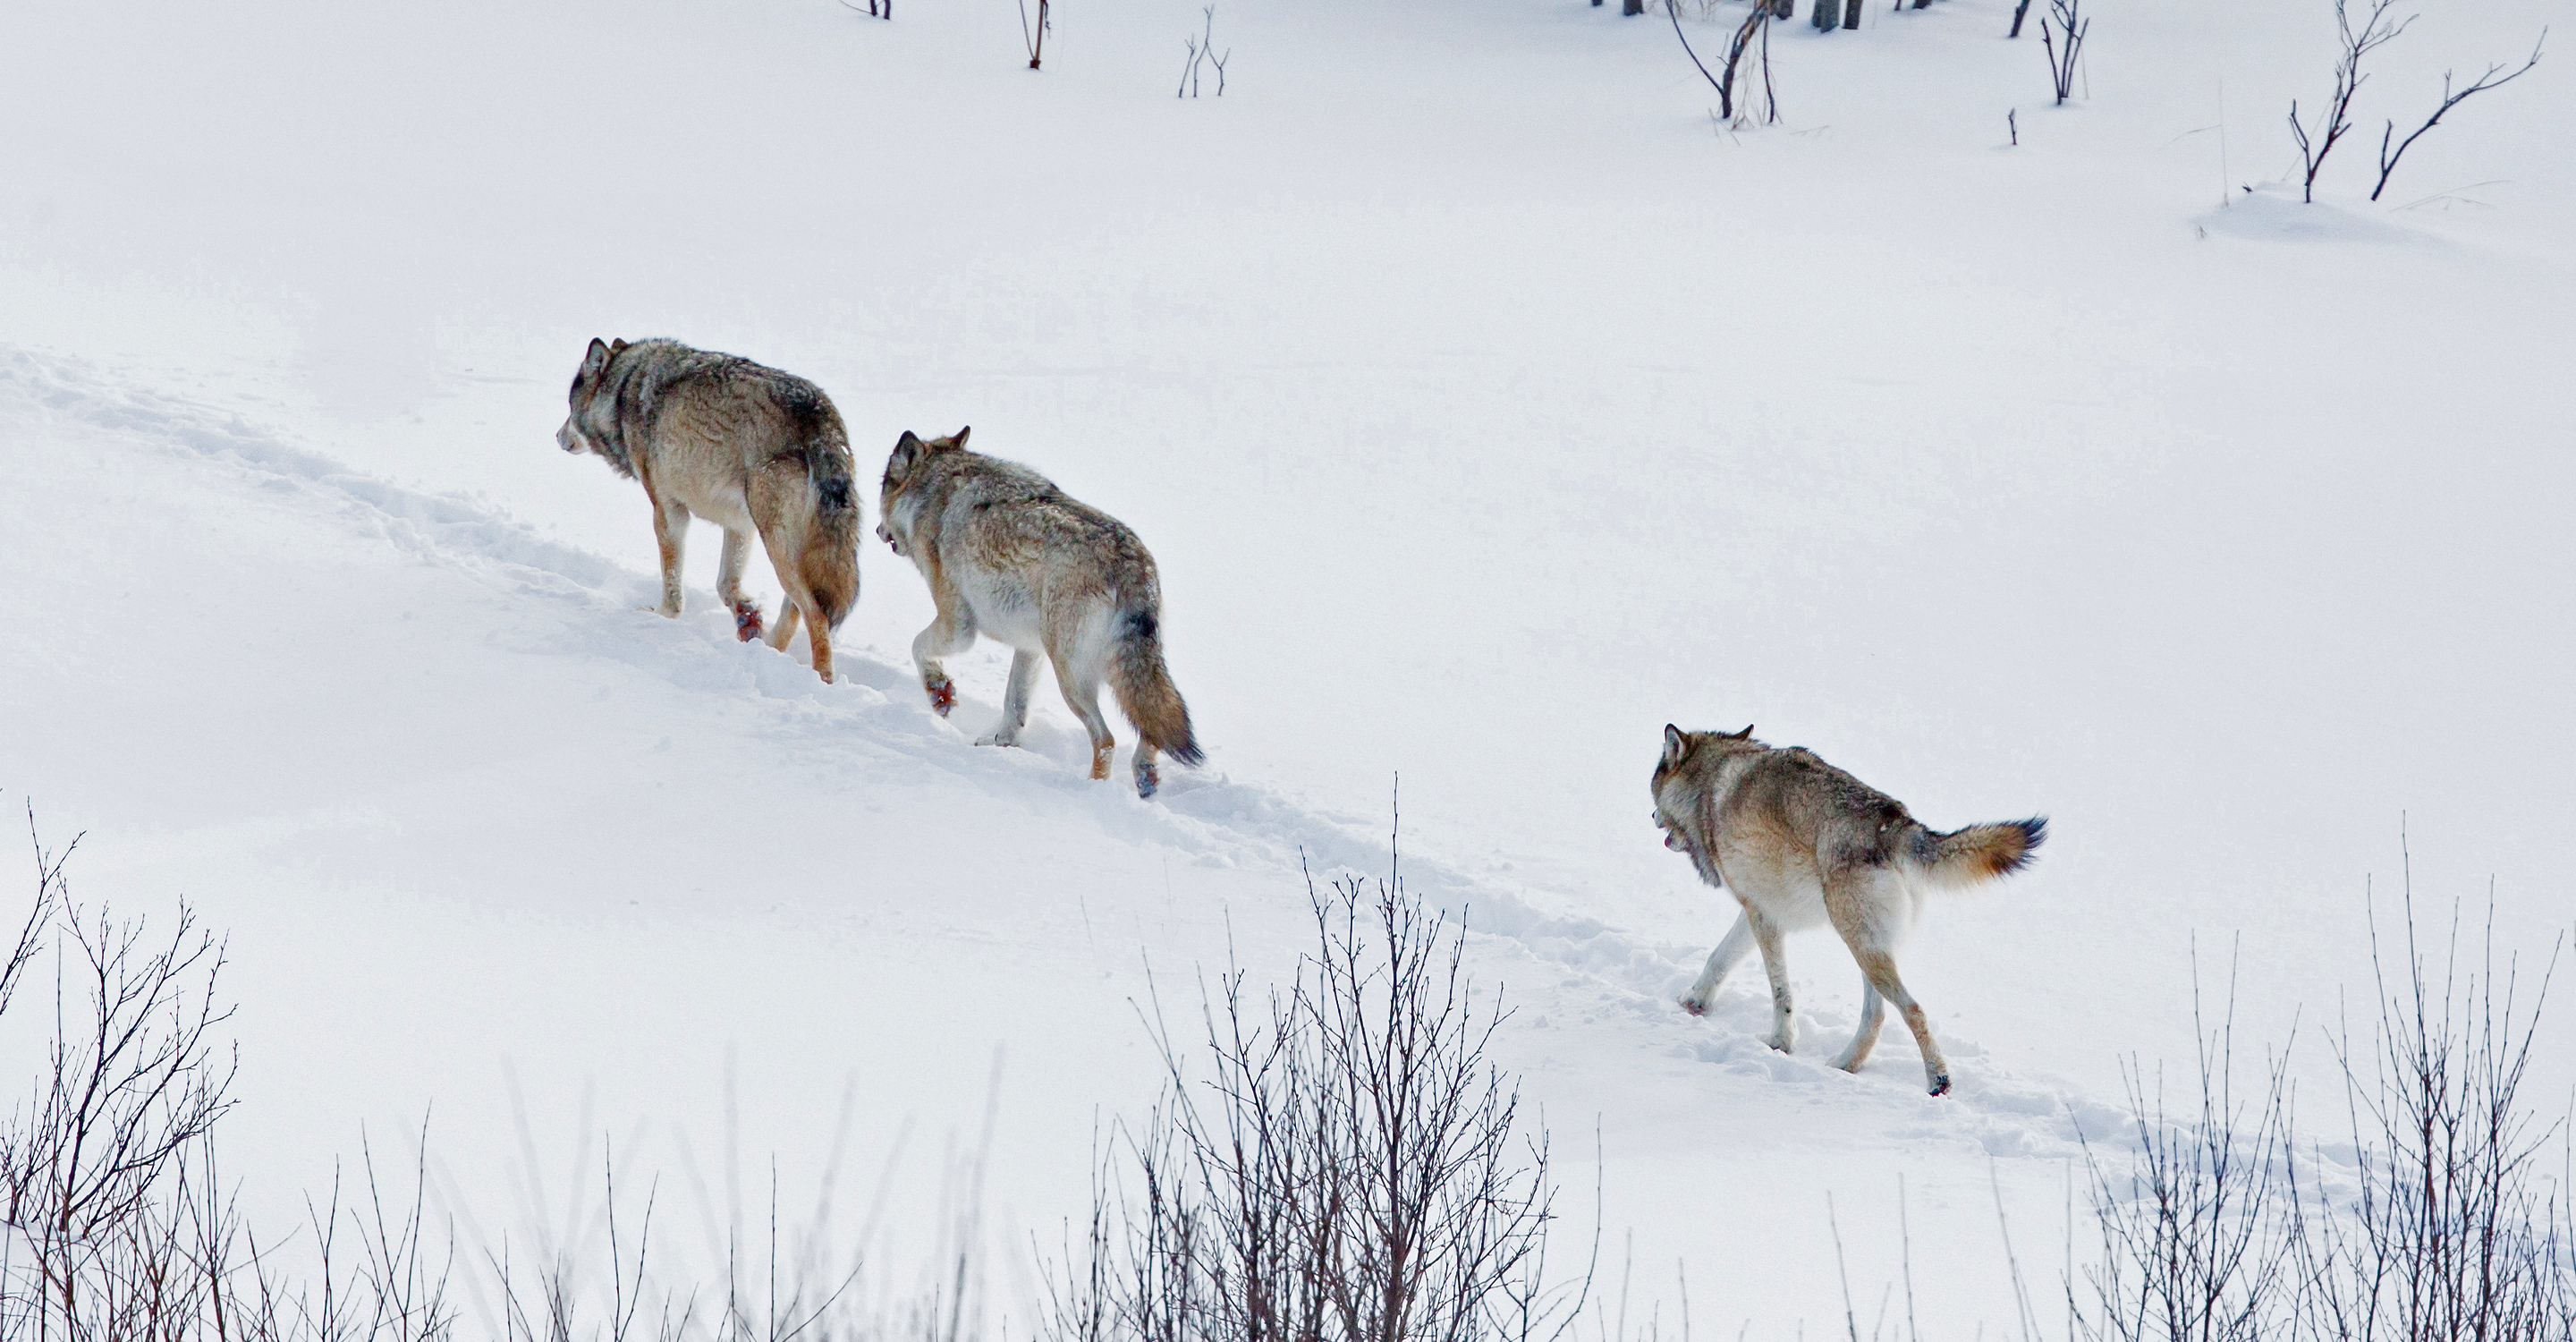 Three gray wolves walk single file in the snow in Yellowstone National Park, United States